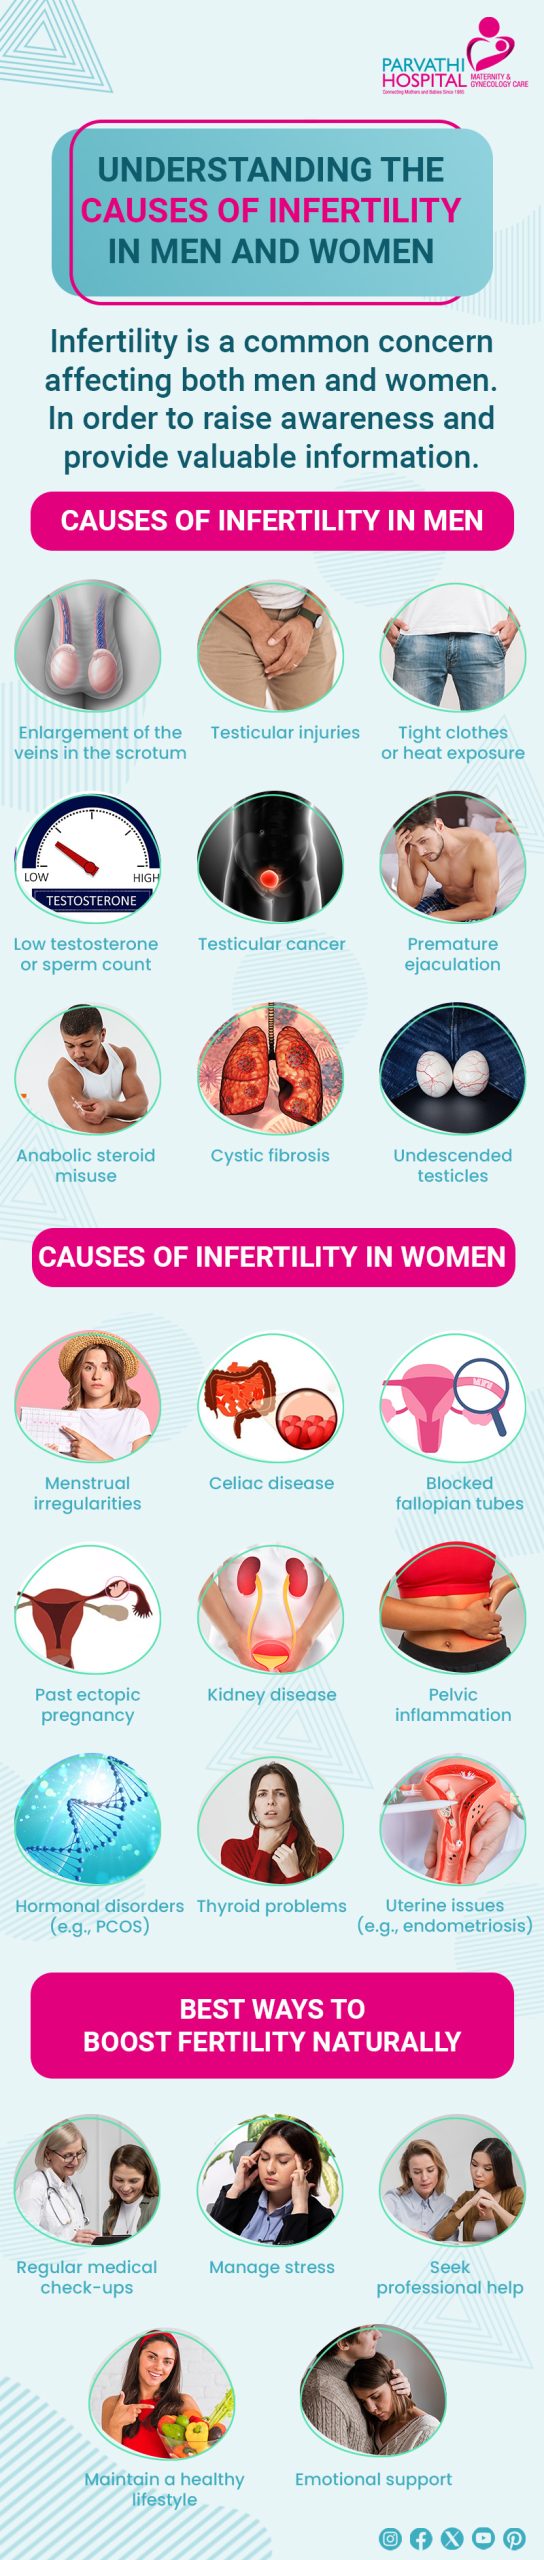 Causes of Infertility in Men and Women